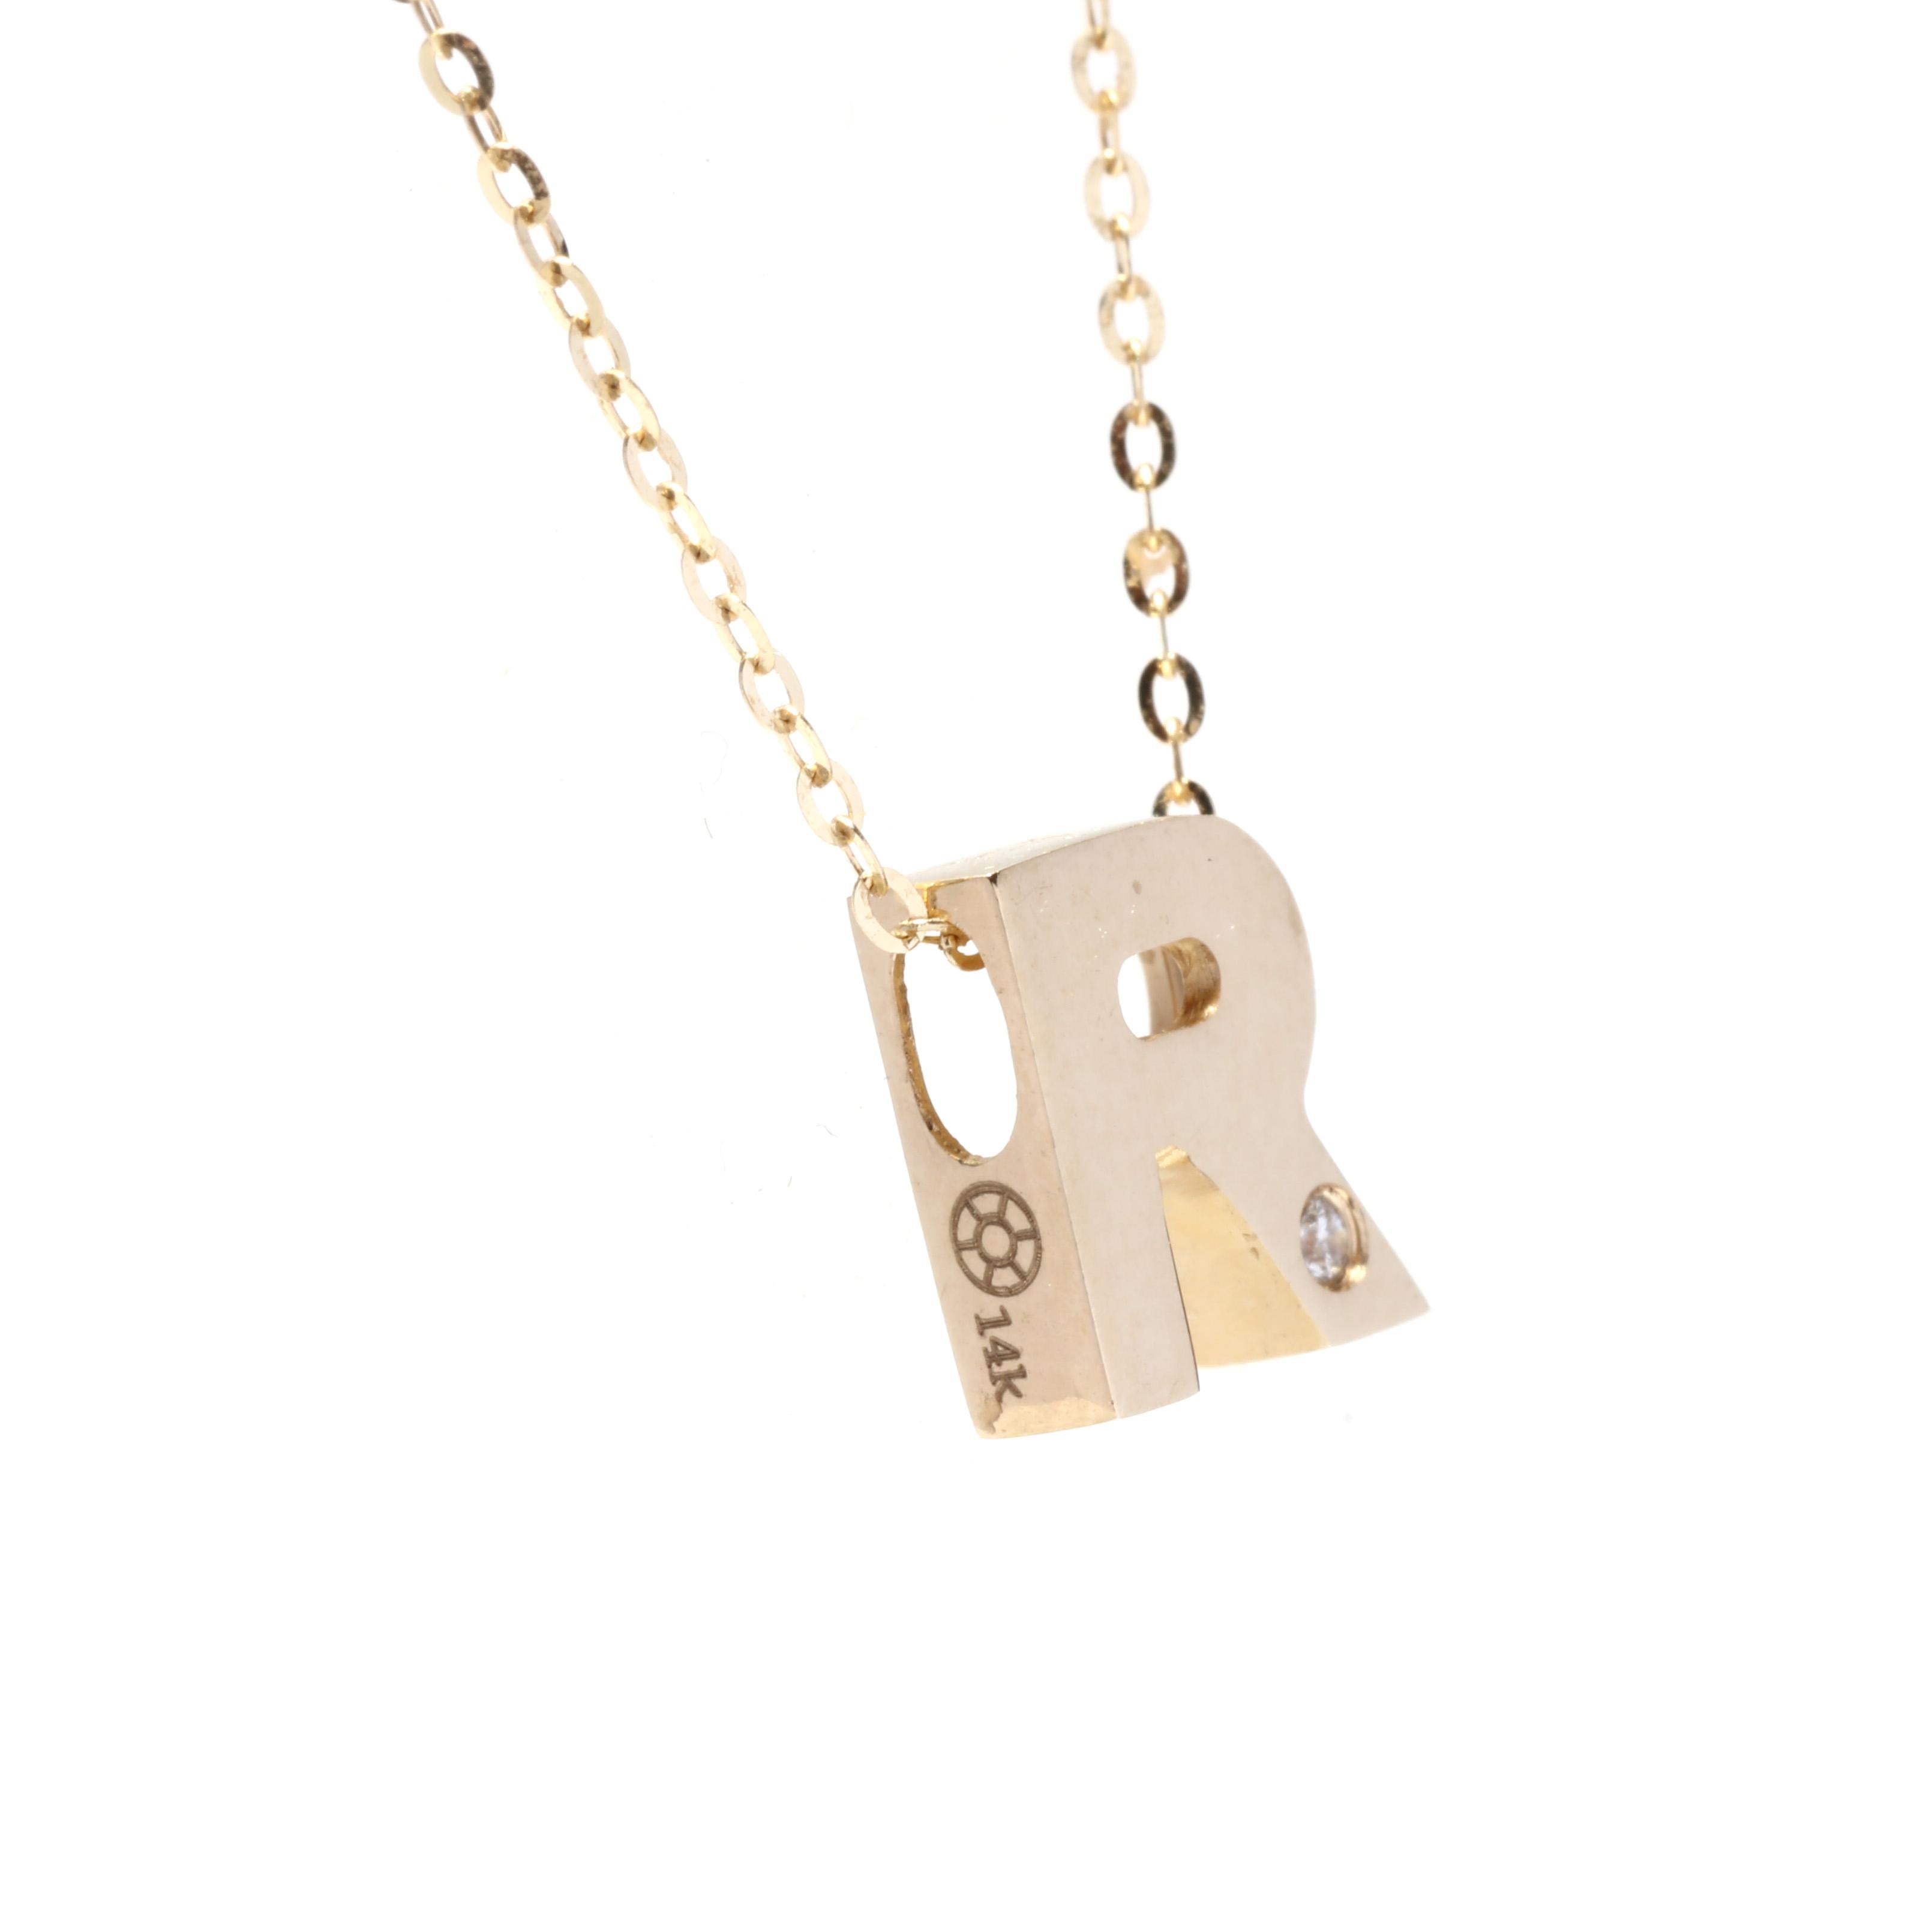 Round Cut Diamond Initial R Necklace, 14K Yellow Gold, Length 16 Inches, Single Stone